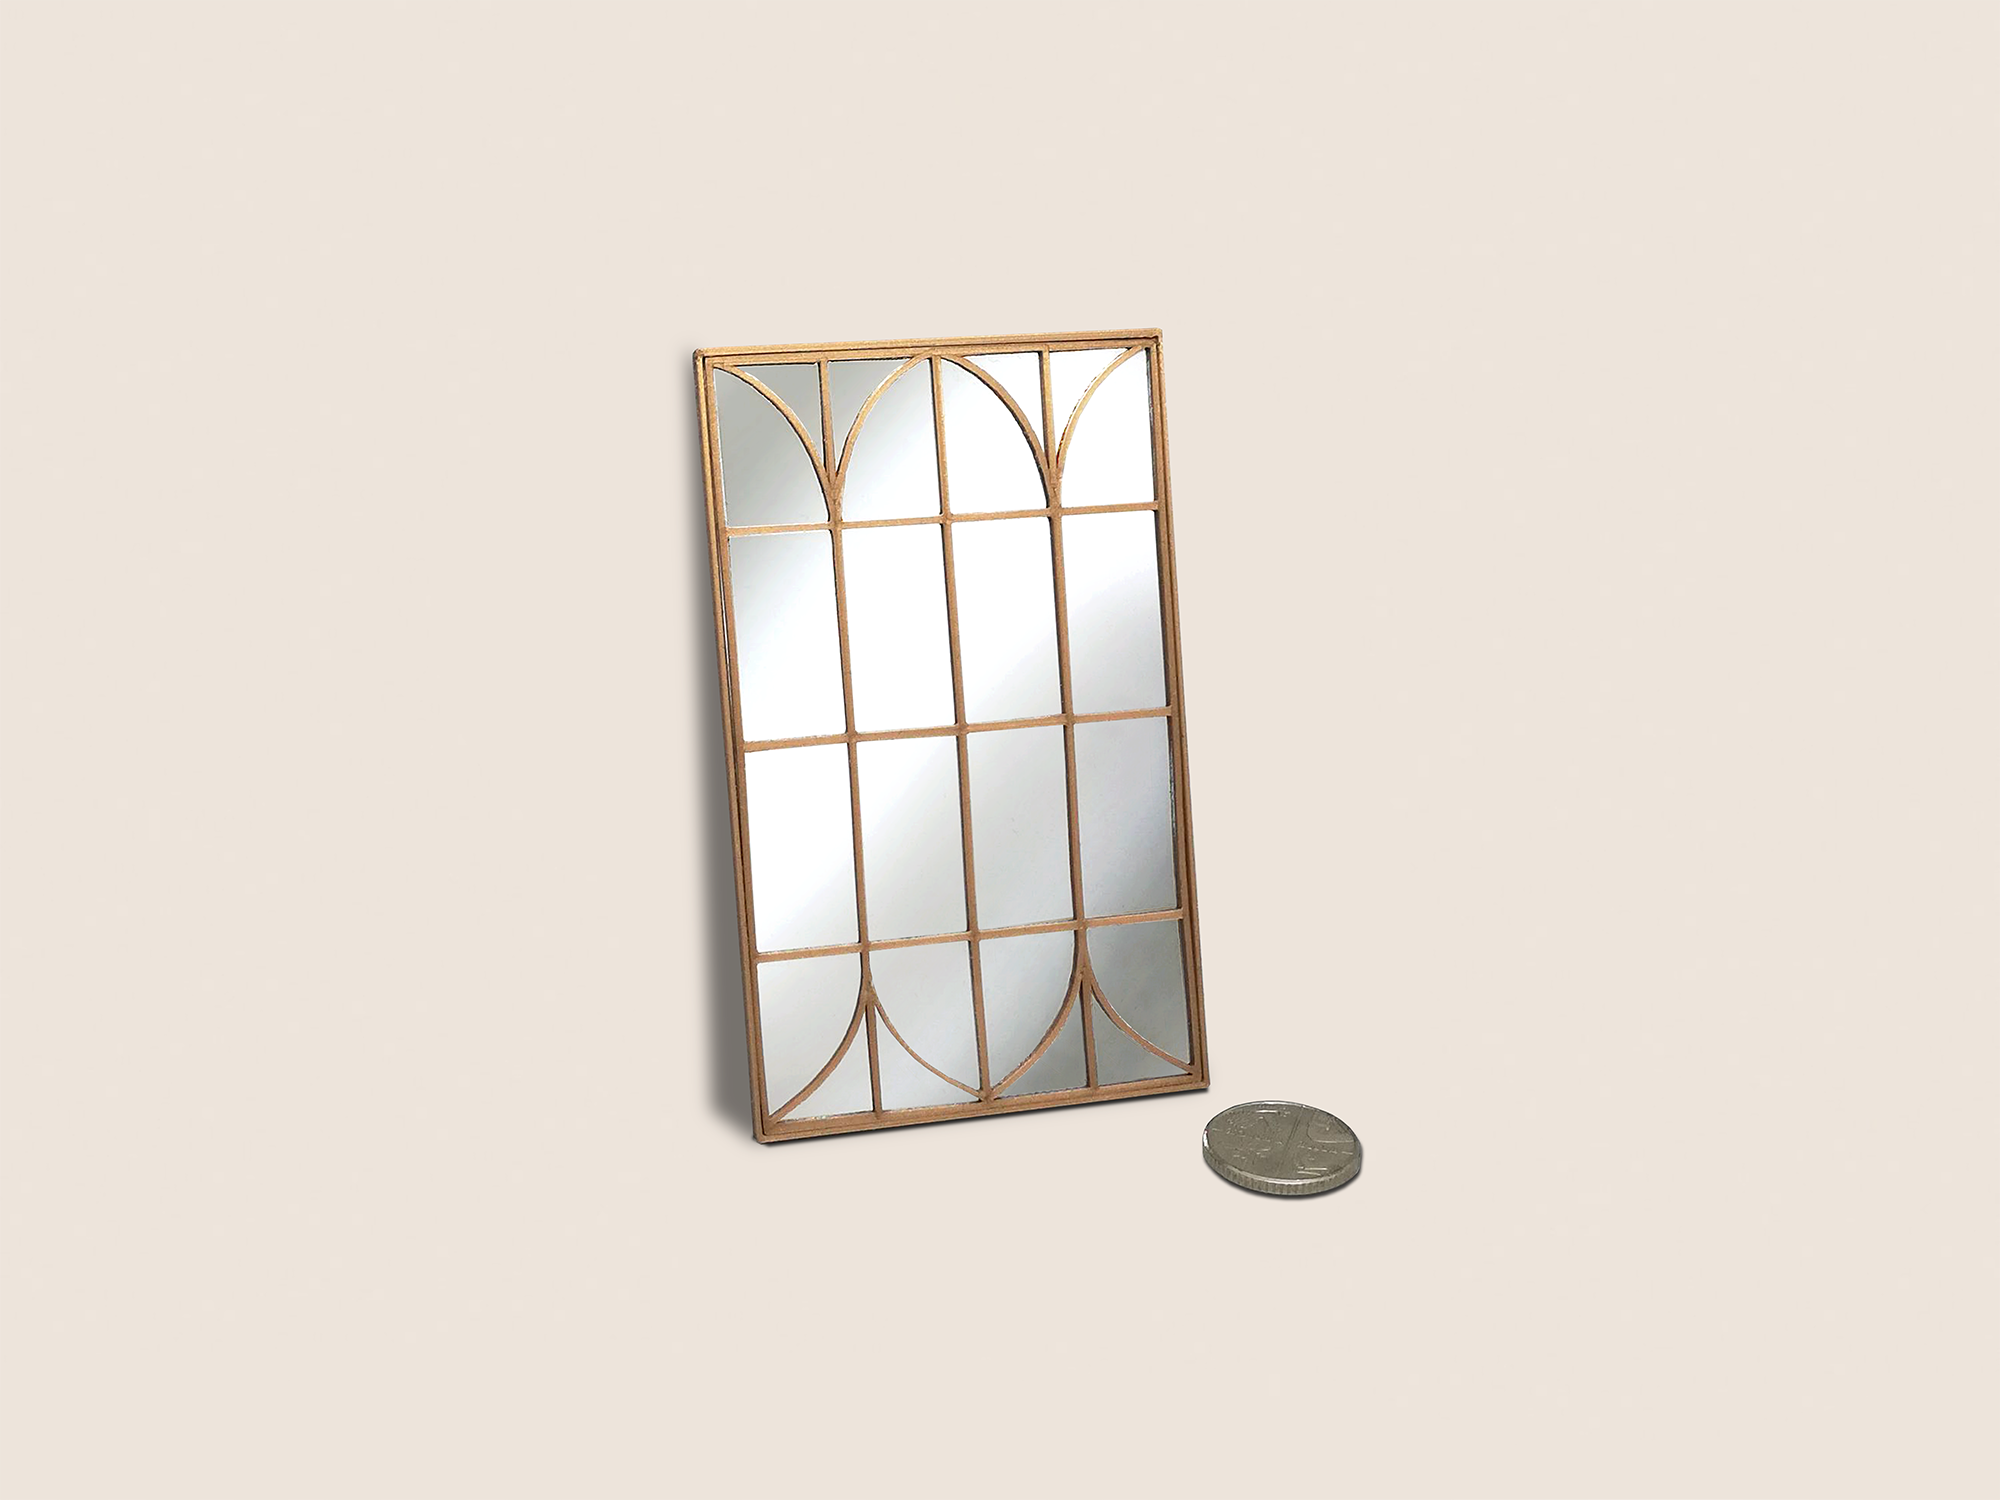 Details about   Dolls House 1/12 scale Art deco Polygon Wall mirror gold effect by BUSHBABY 